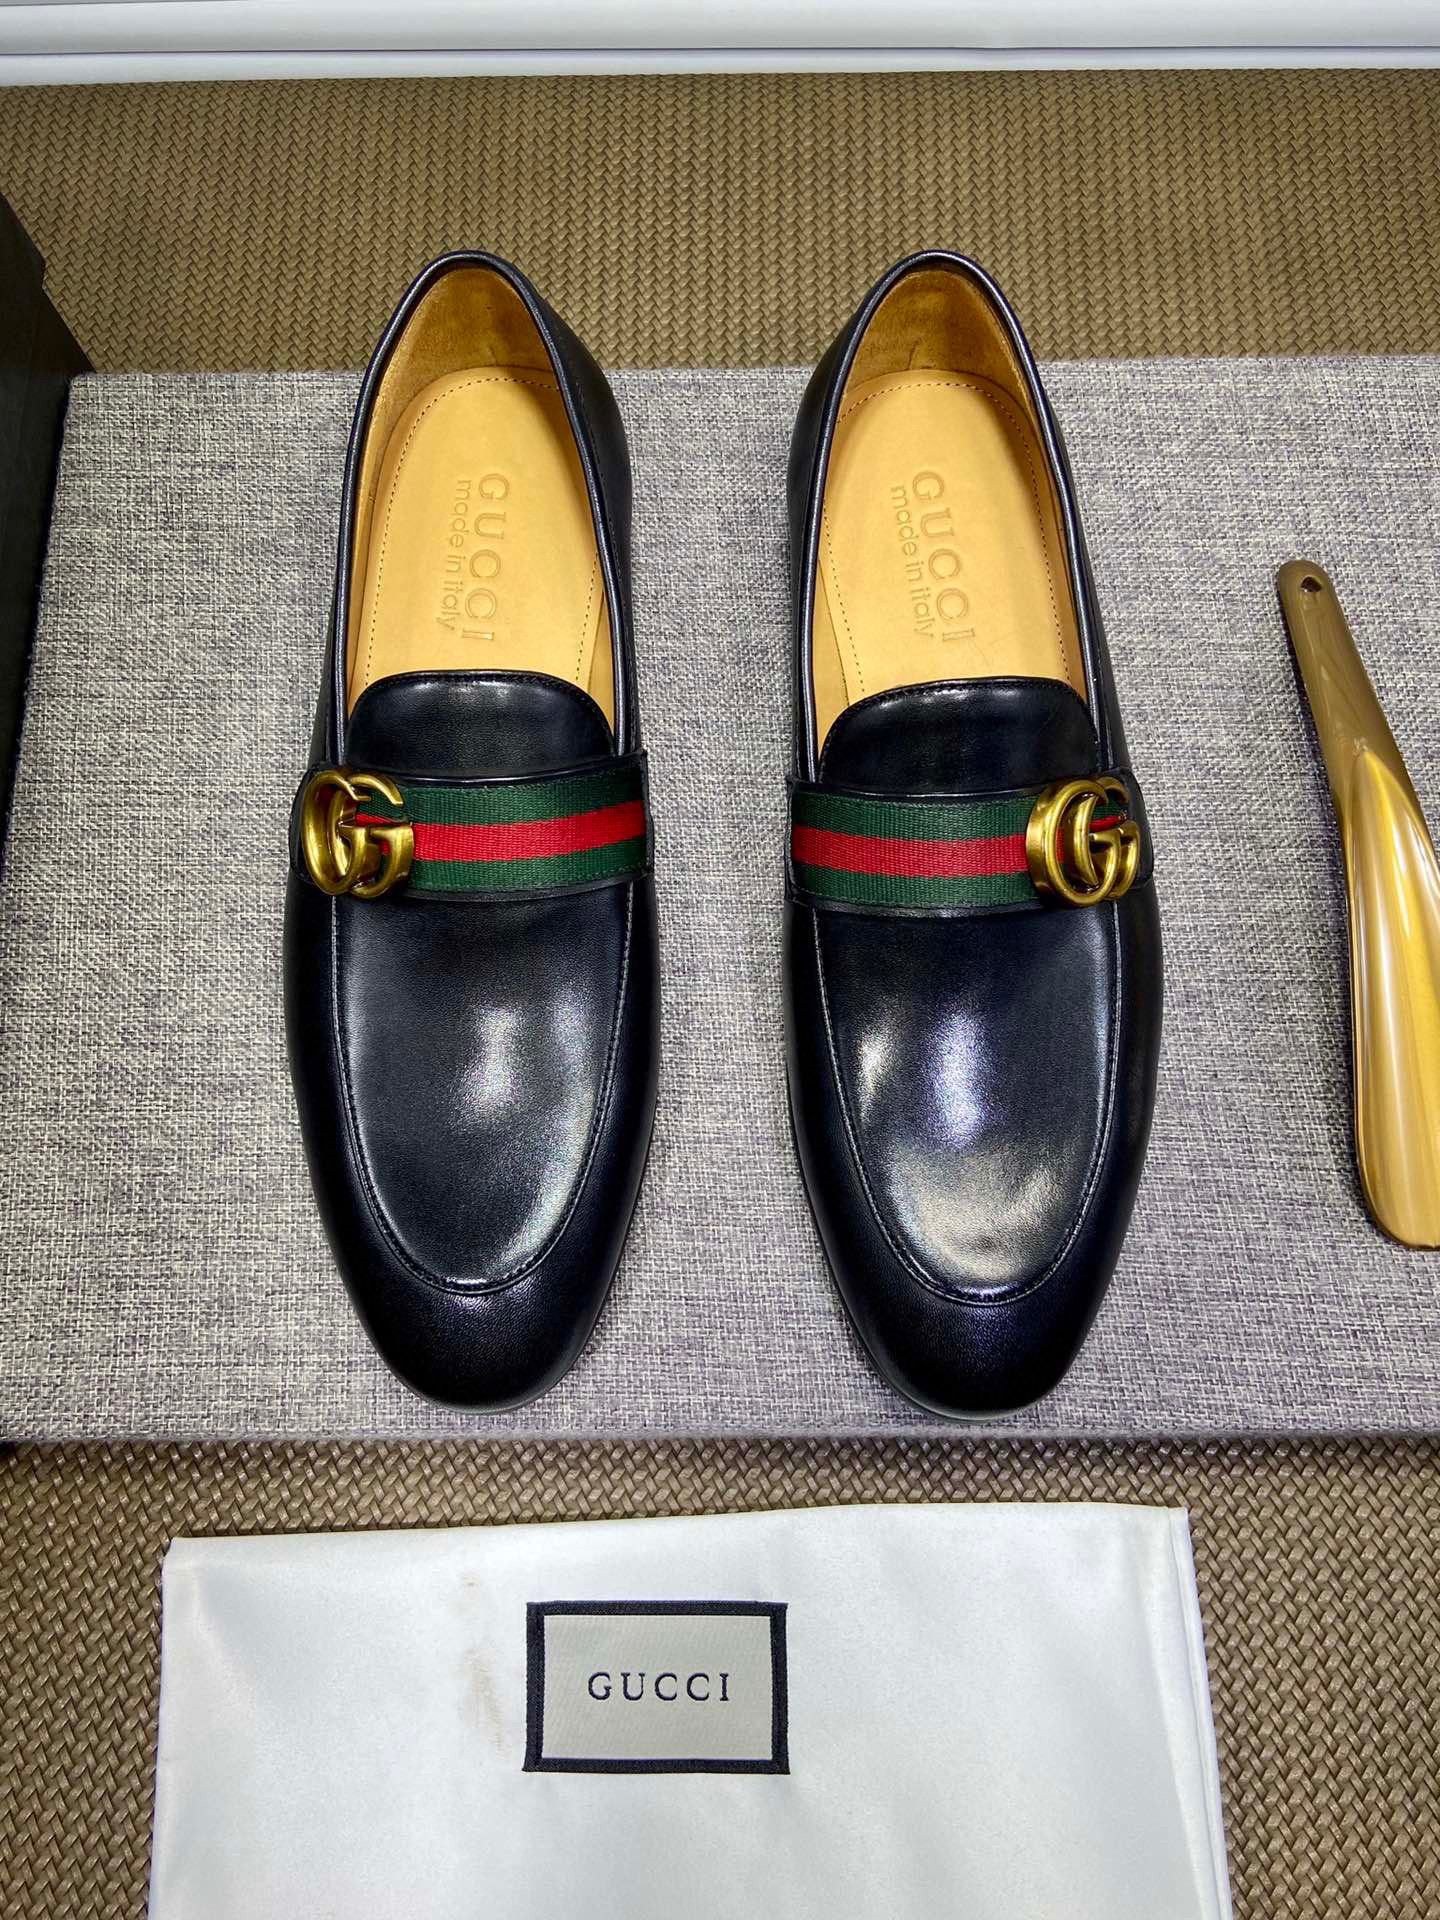 Gucci Cowhide Leather Loafer For Men # 274364, cheap Gucci Dress Shoes For Men, only $92!